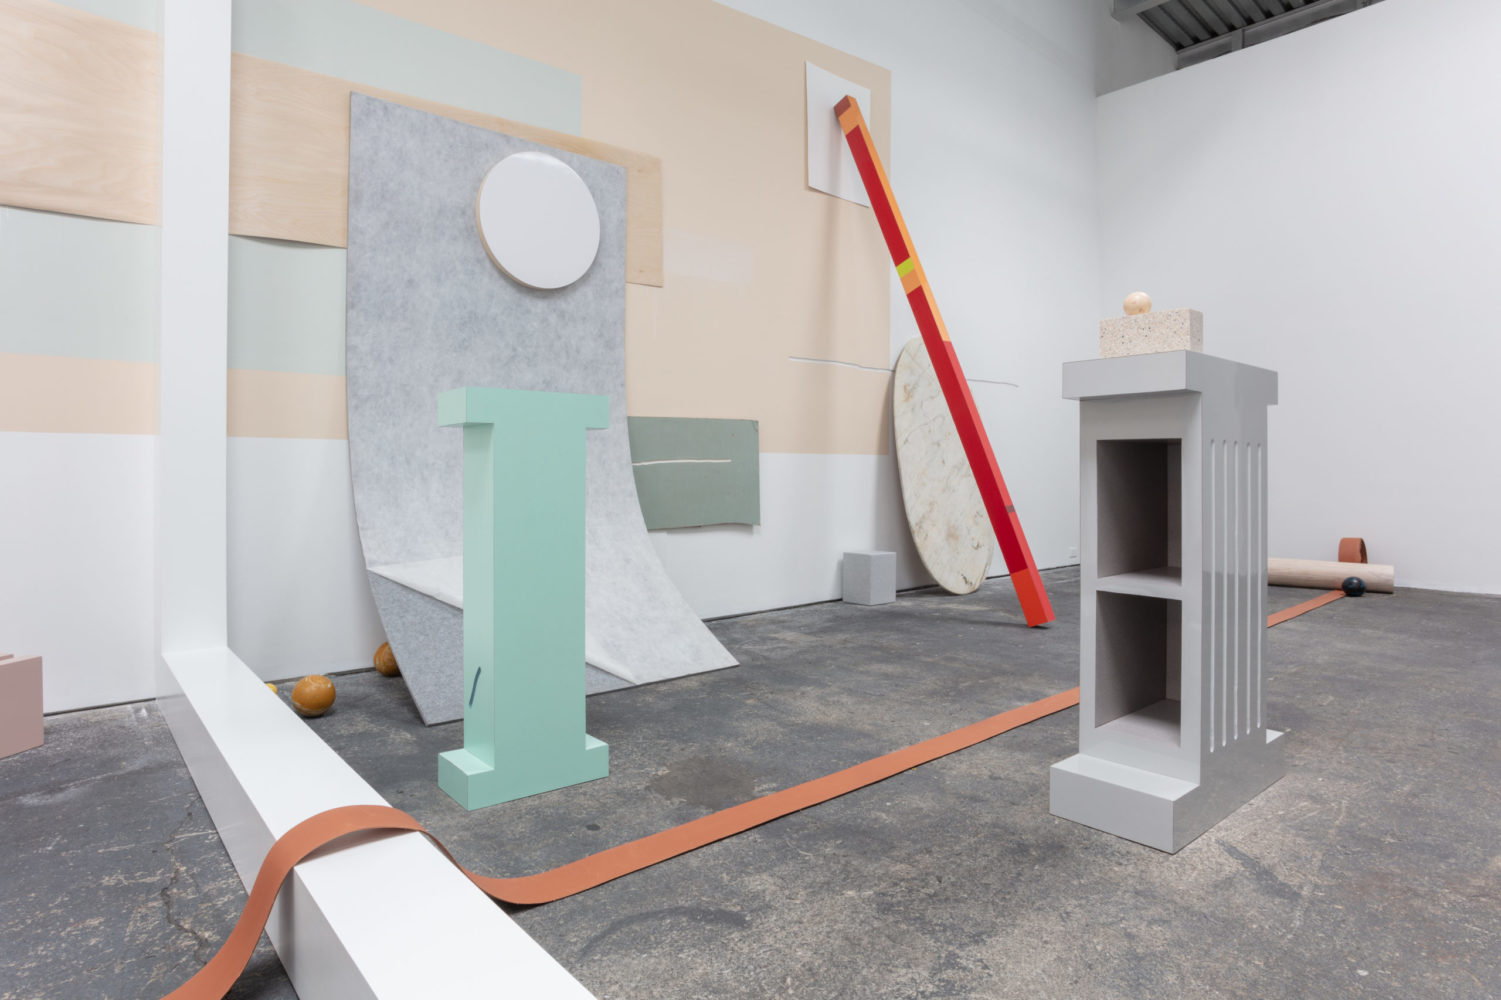 Installation view, "Katie Bell: ARENA," courtesy of Spencer Brownstone Gallery.